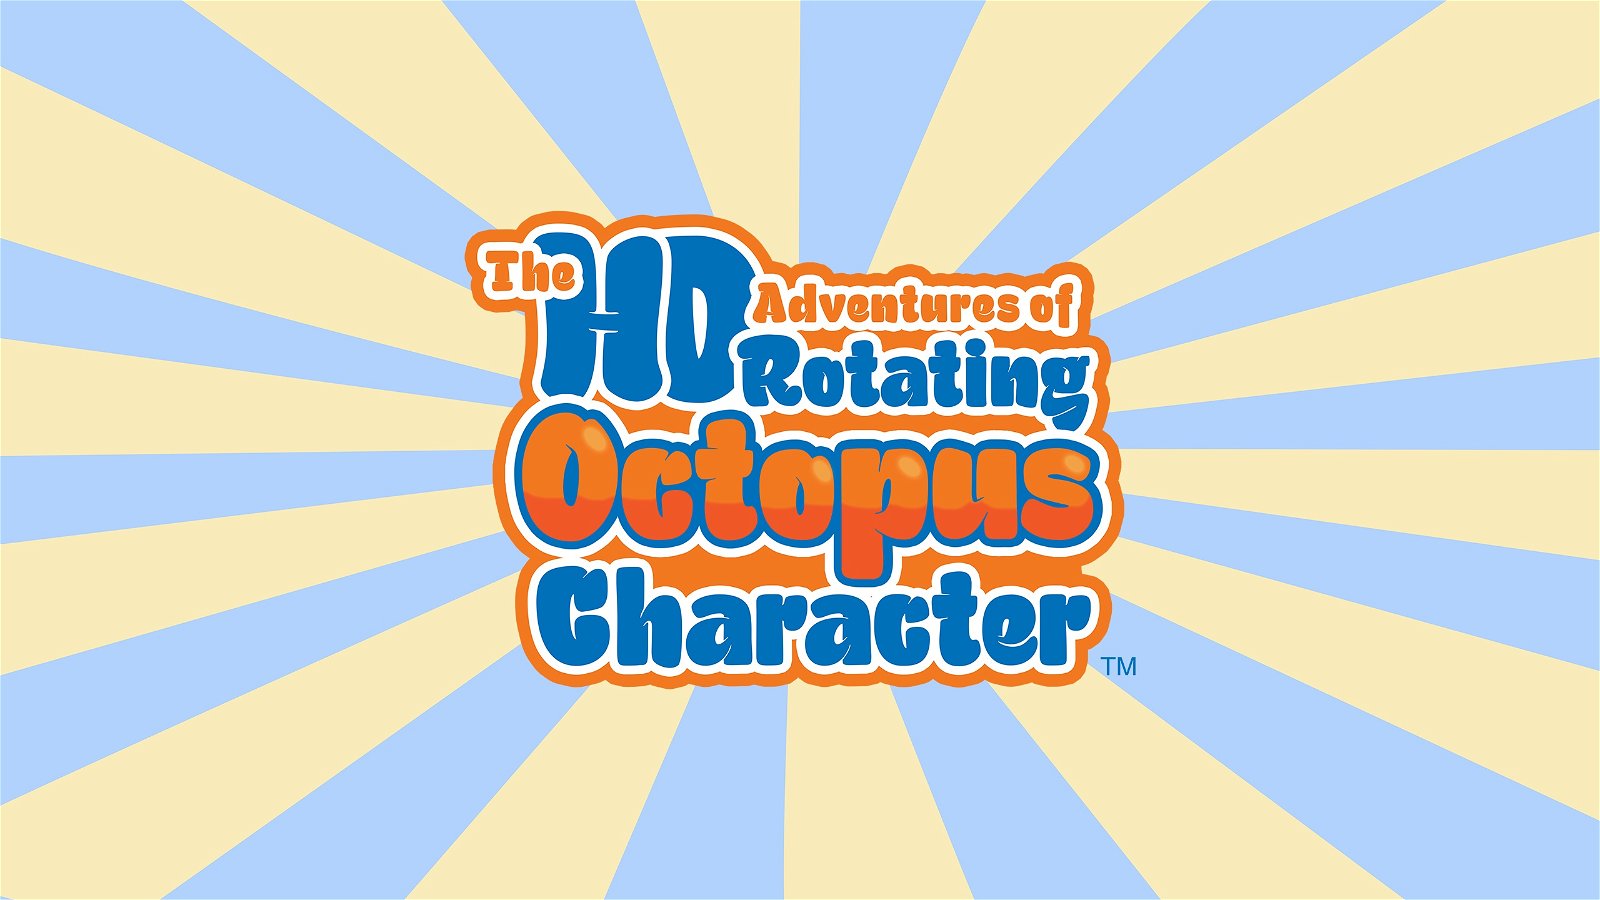 Image of The HD Adventures of Rotating Octopus Character